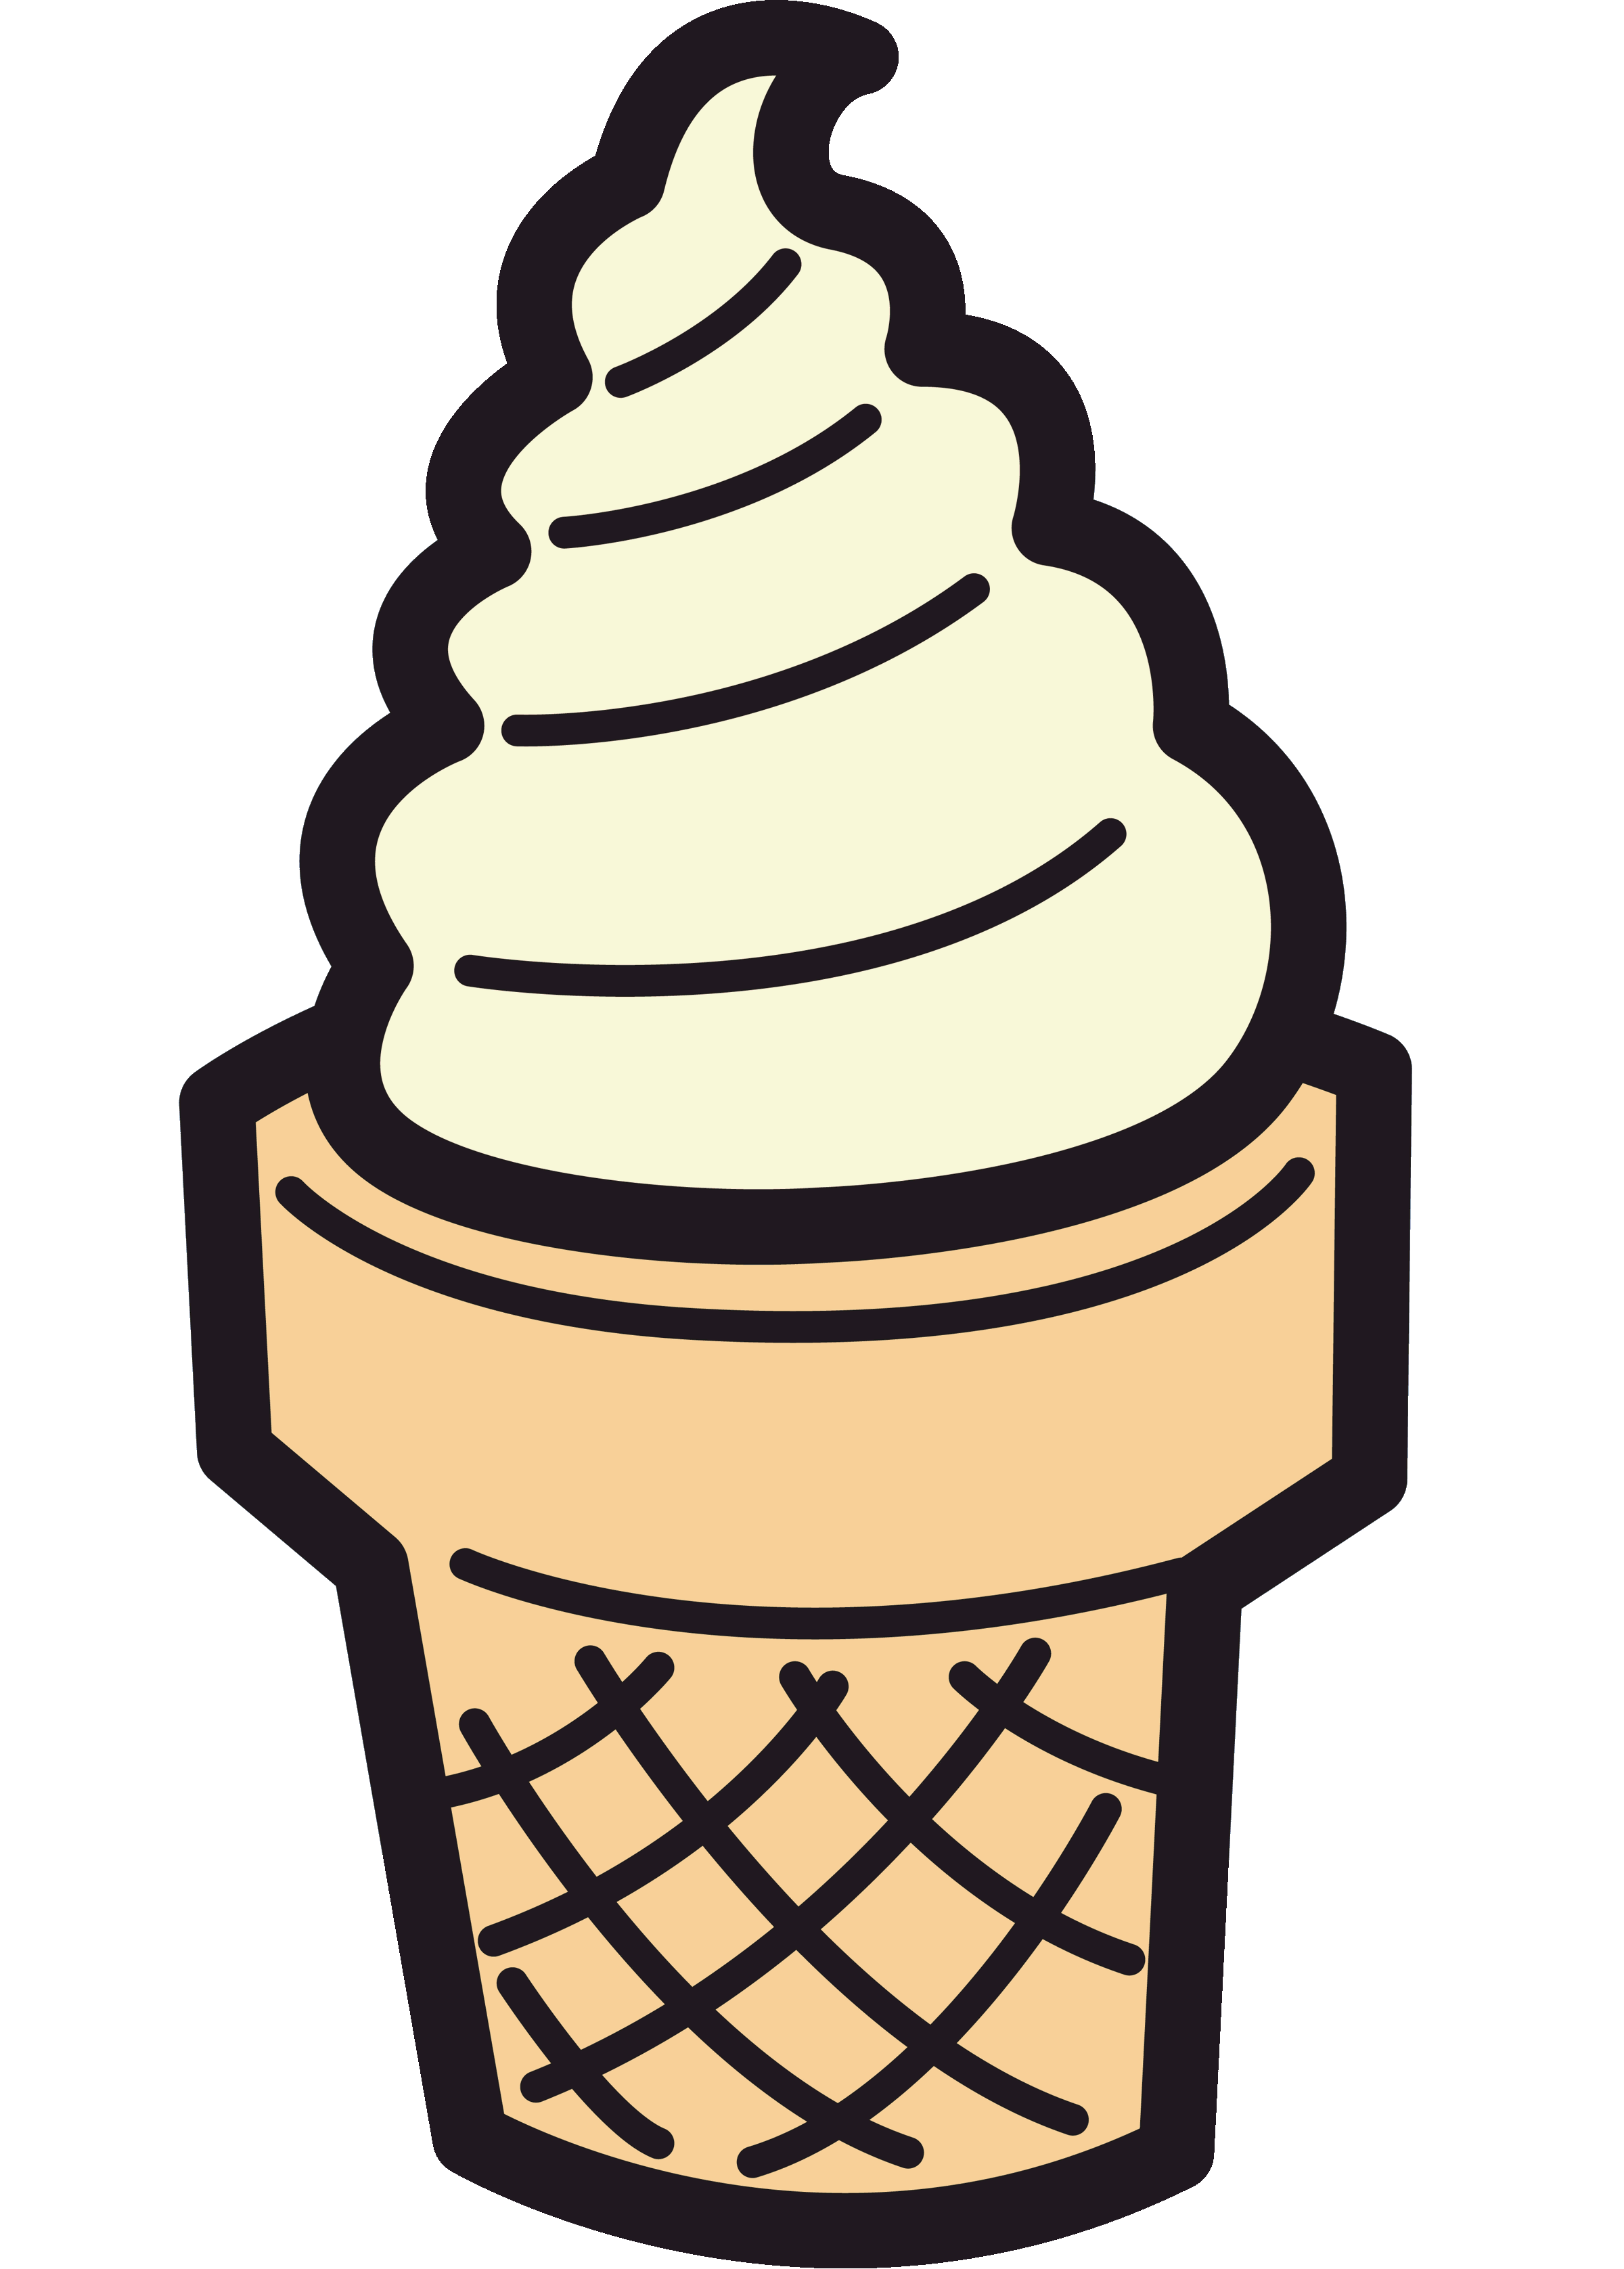 ice cream in a bowl clipart - photo #22